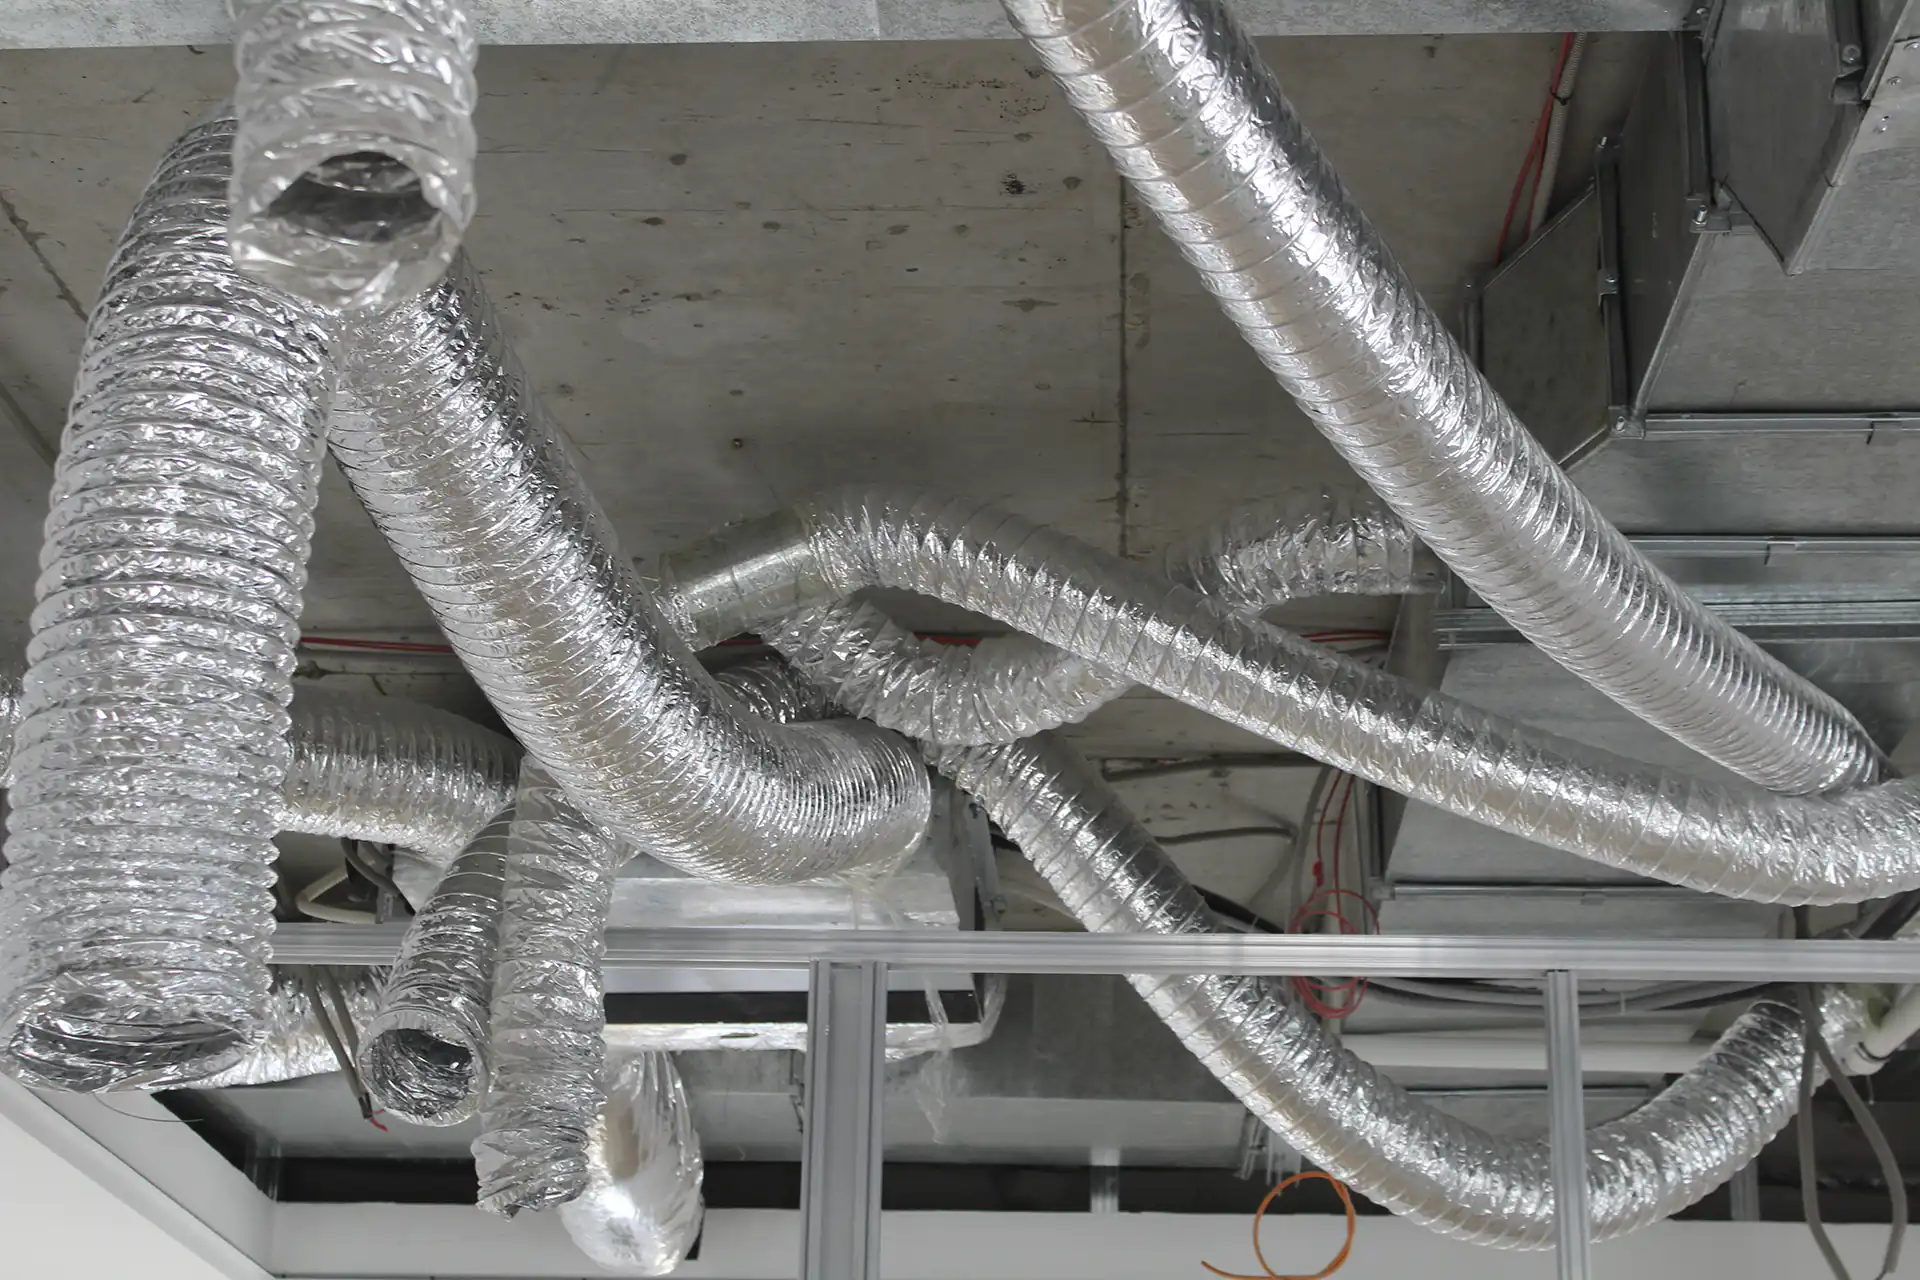 employees setting up a ducting network made of aluminium